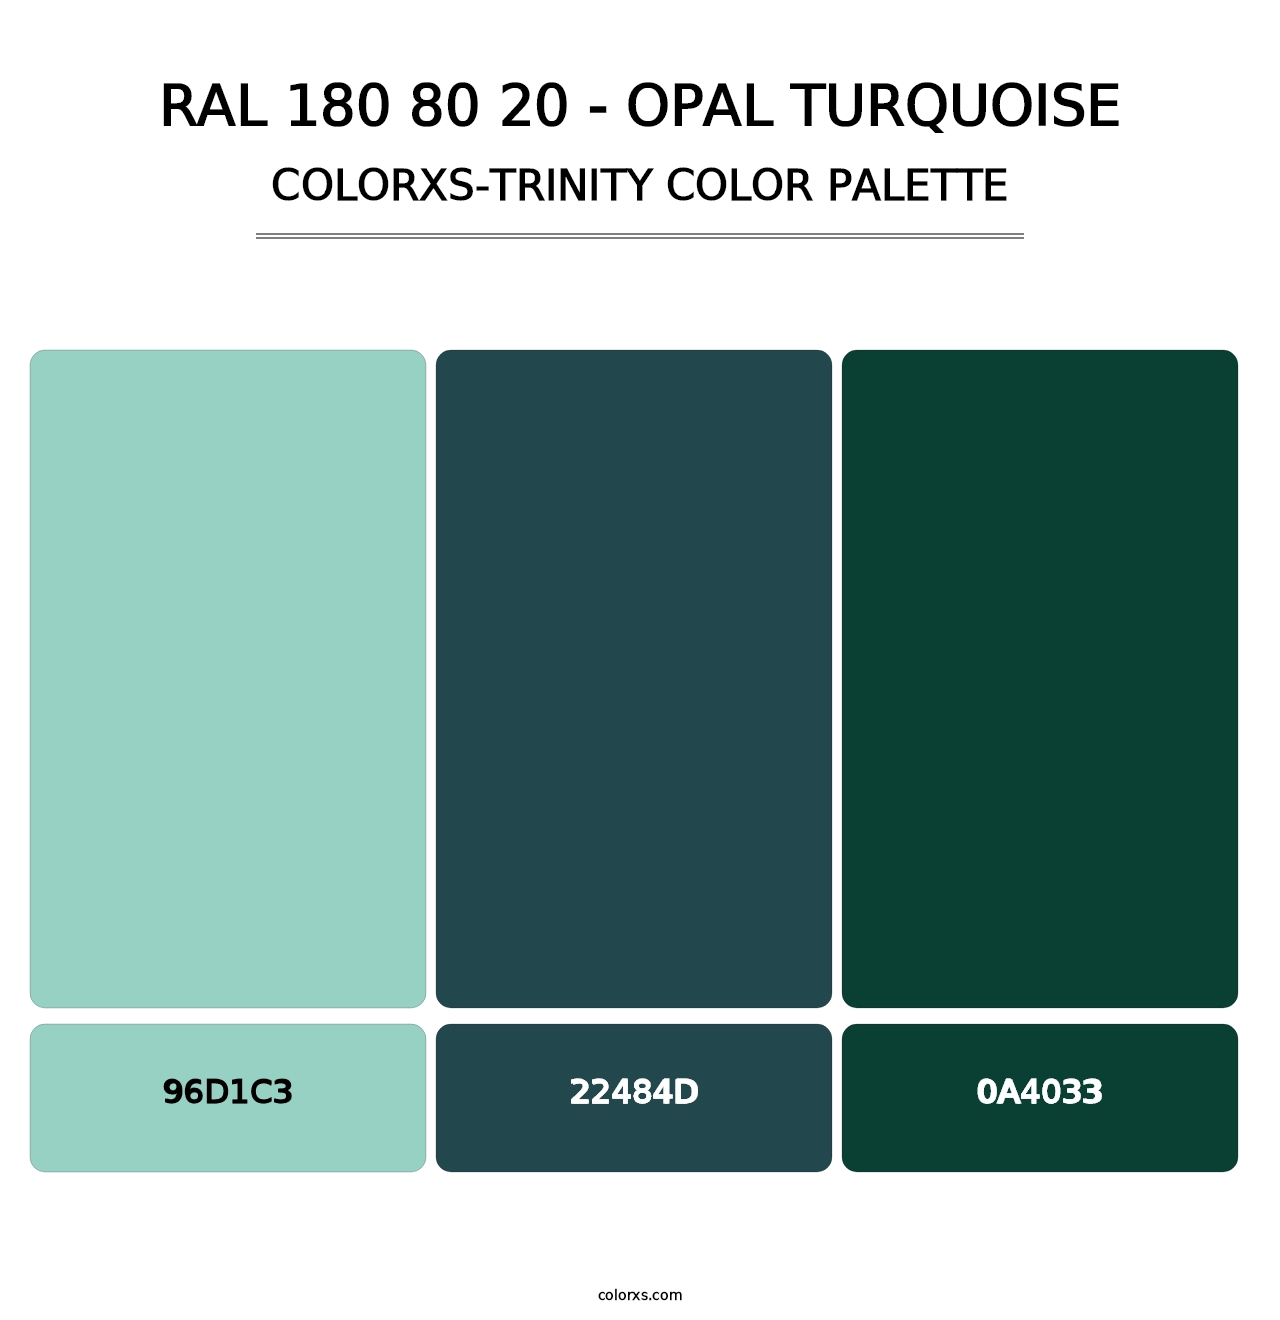 RAL 180 80 20 - Opal Turquoise - Colorxs Trinity Palette